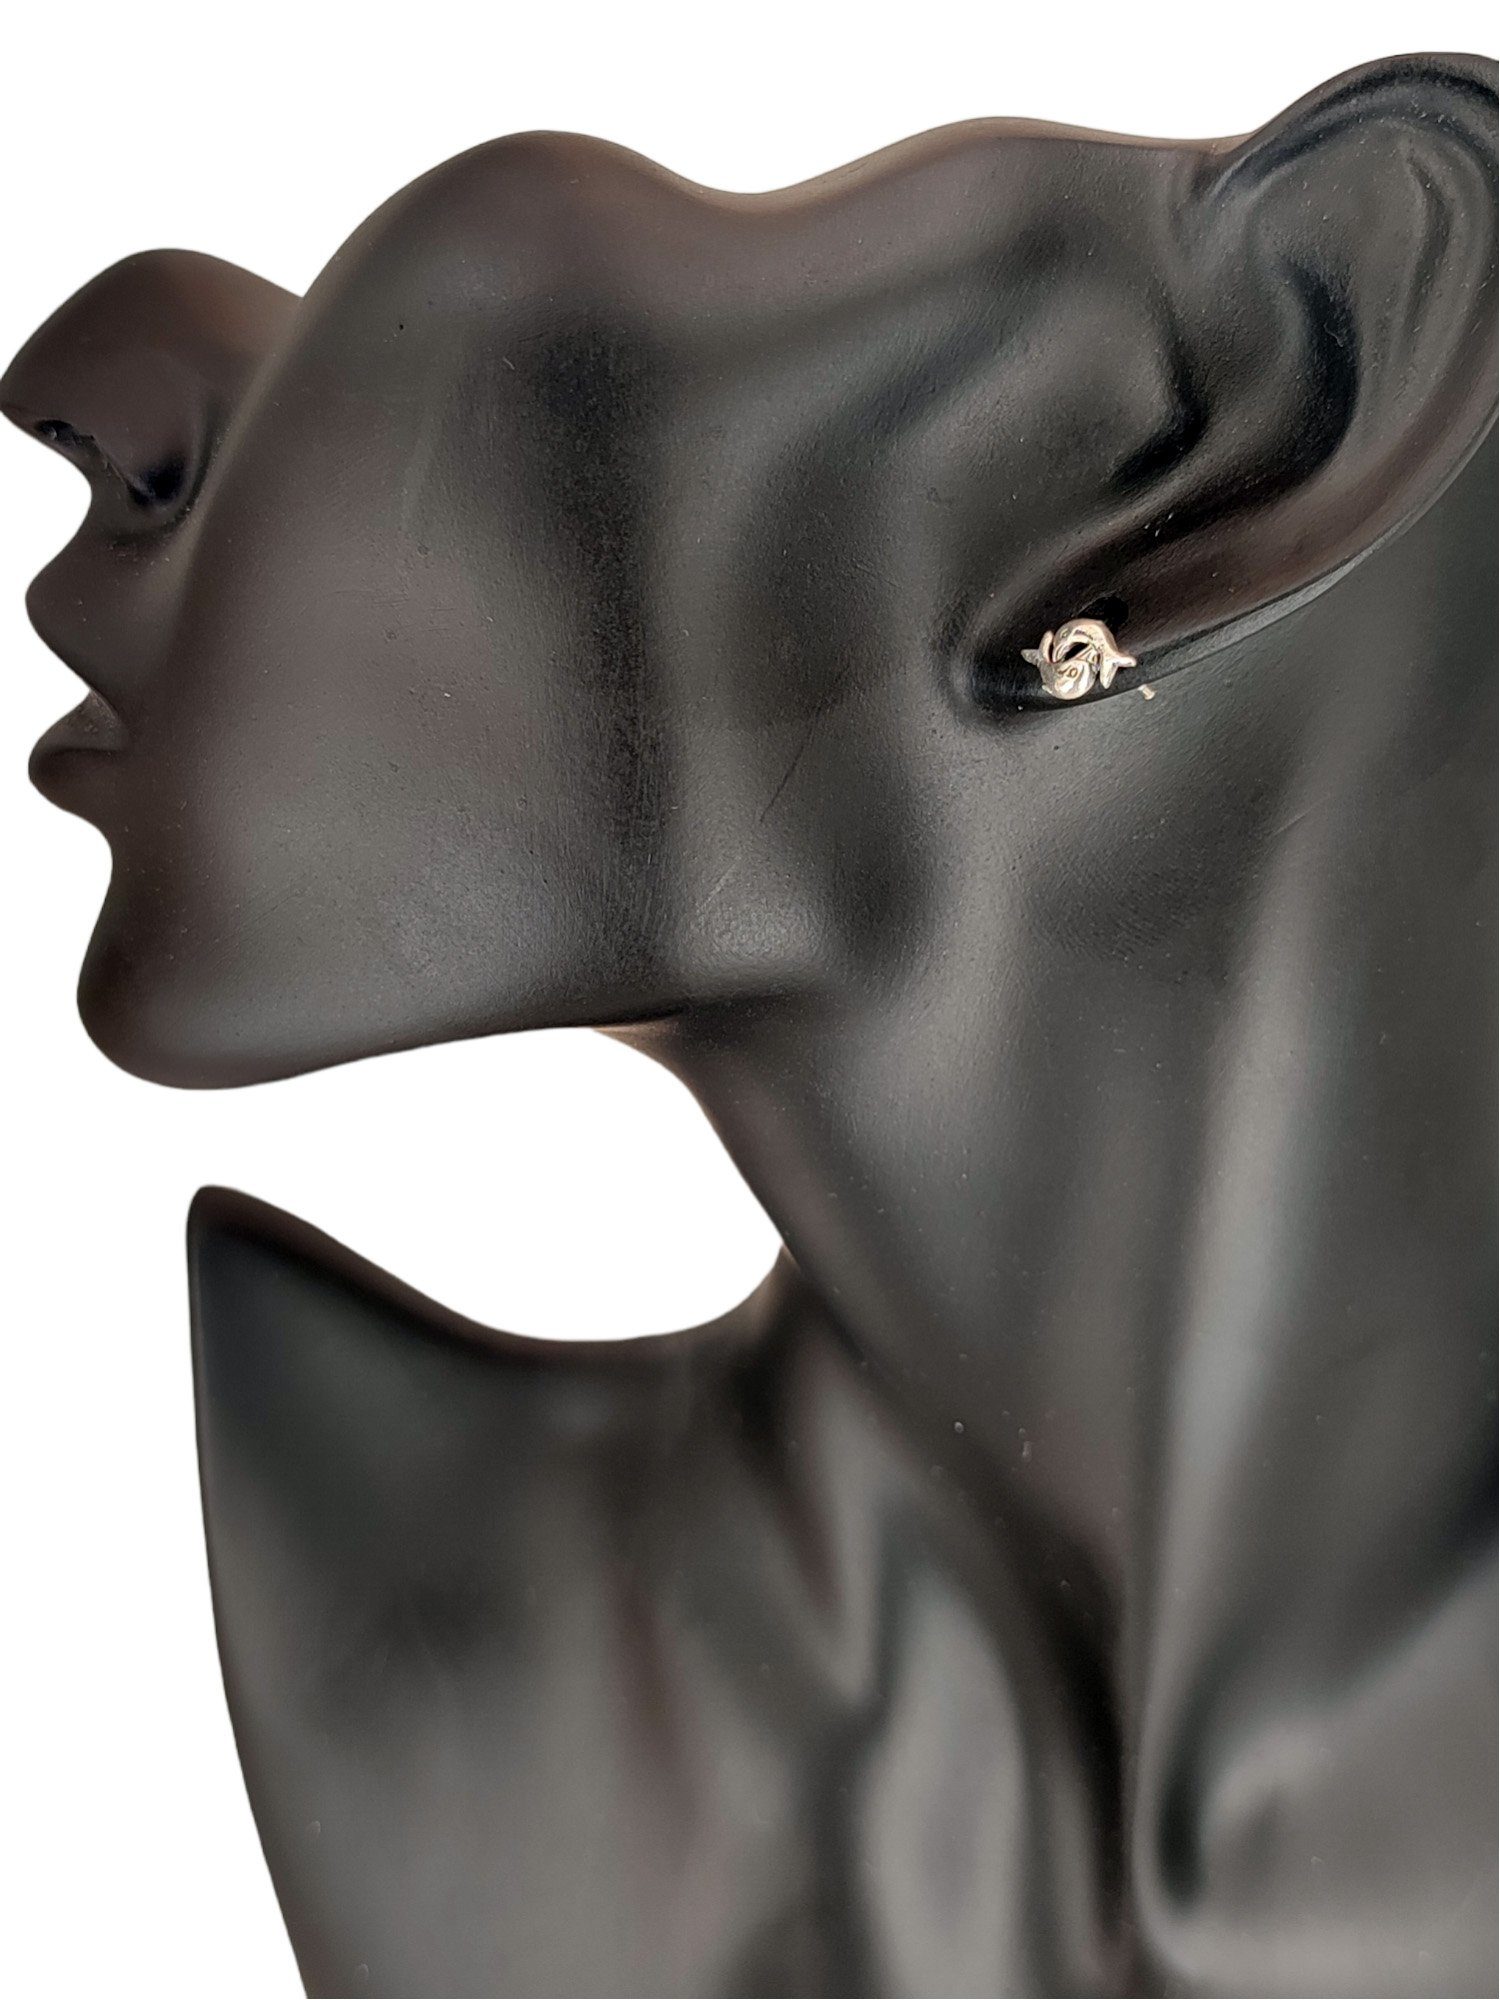 Kiss of Sterling Leather Ohrring Delfin Silber Ohr 925 Ohrringe Ohrstecker Paar Silber